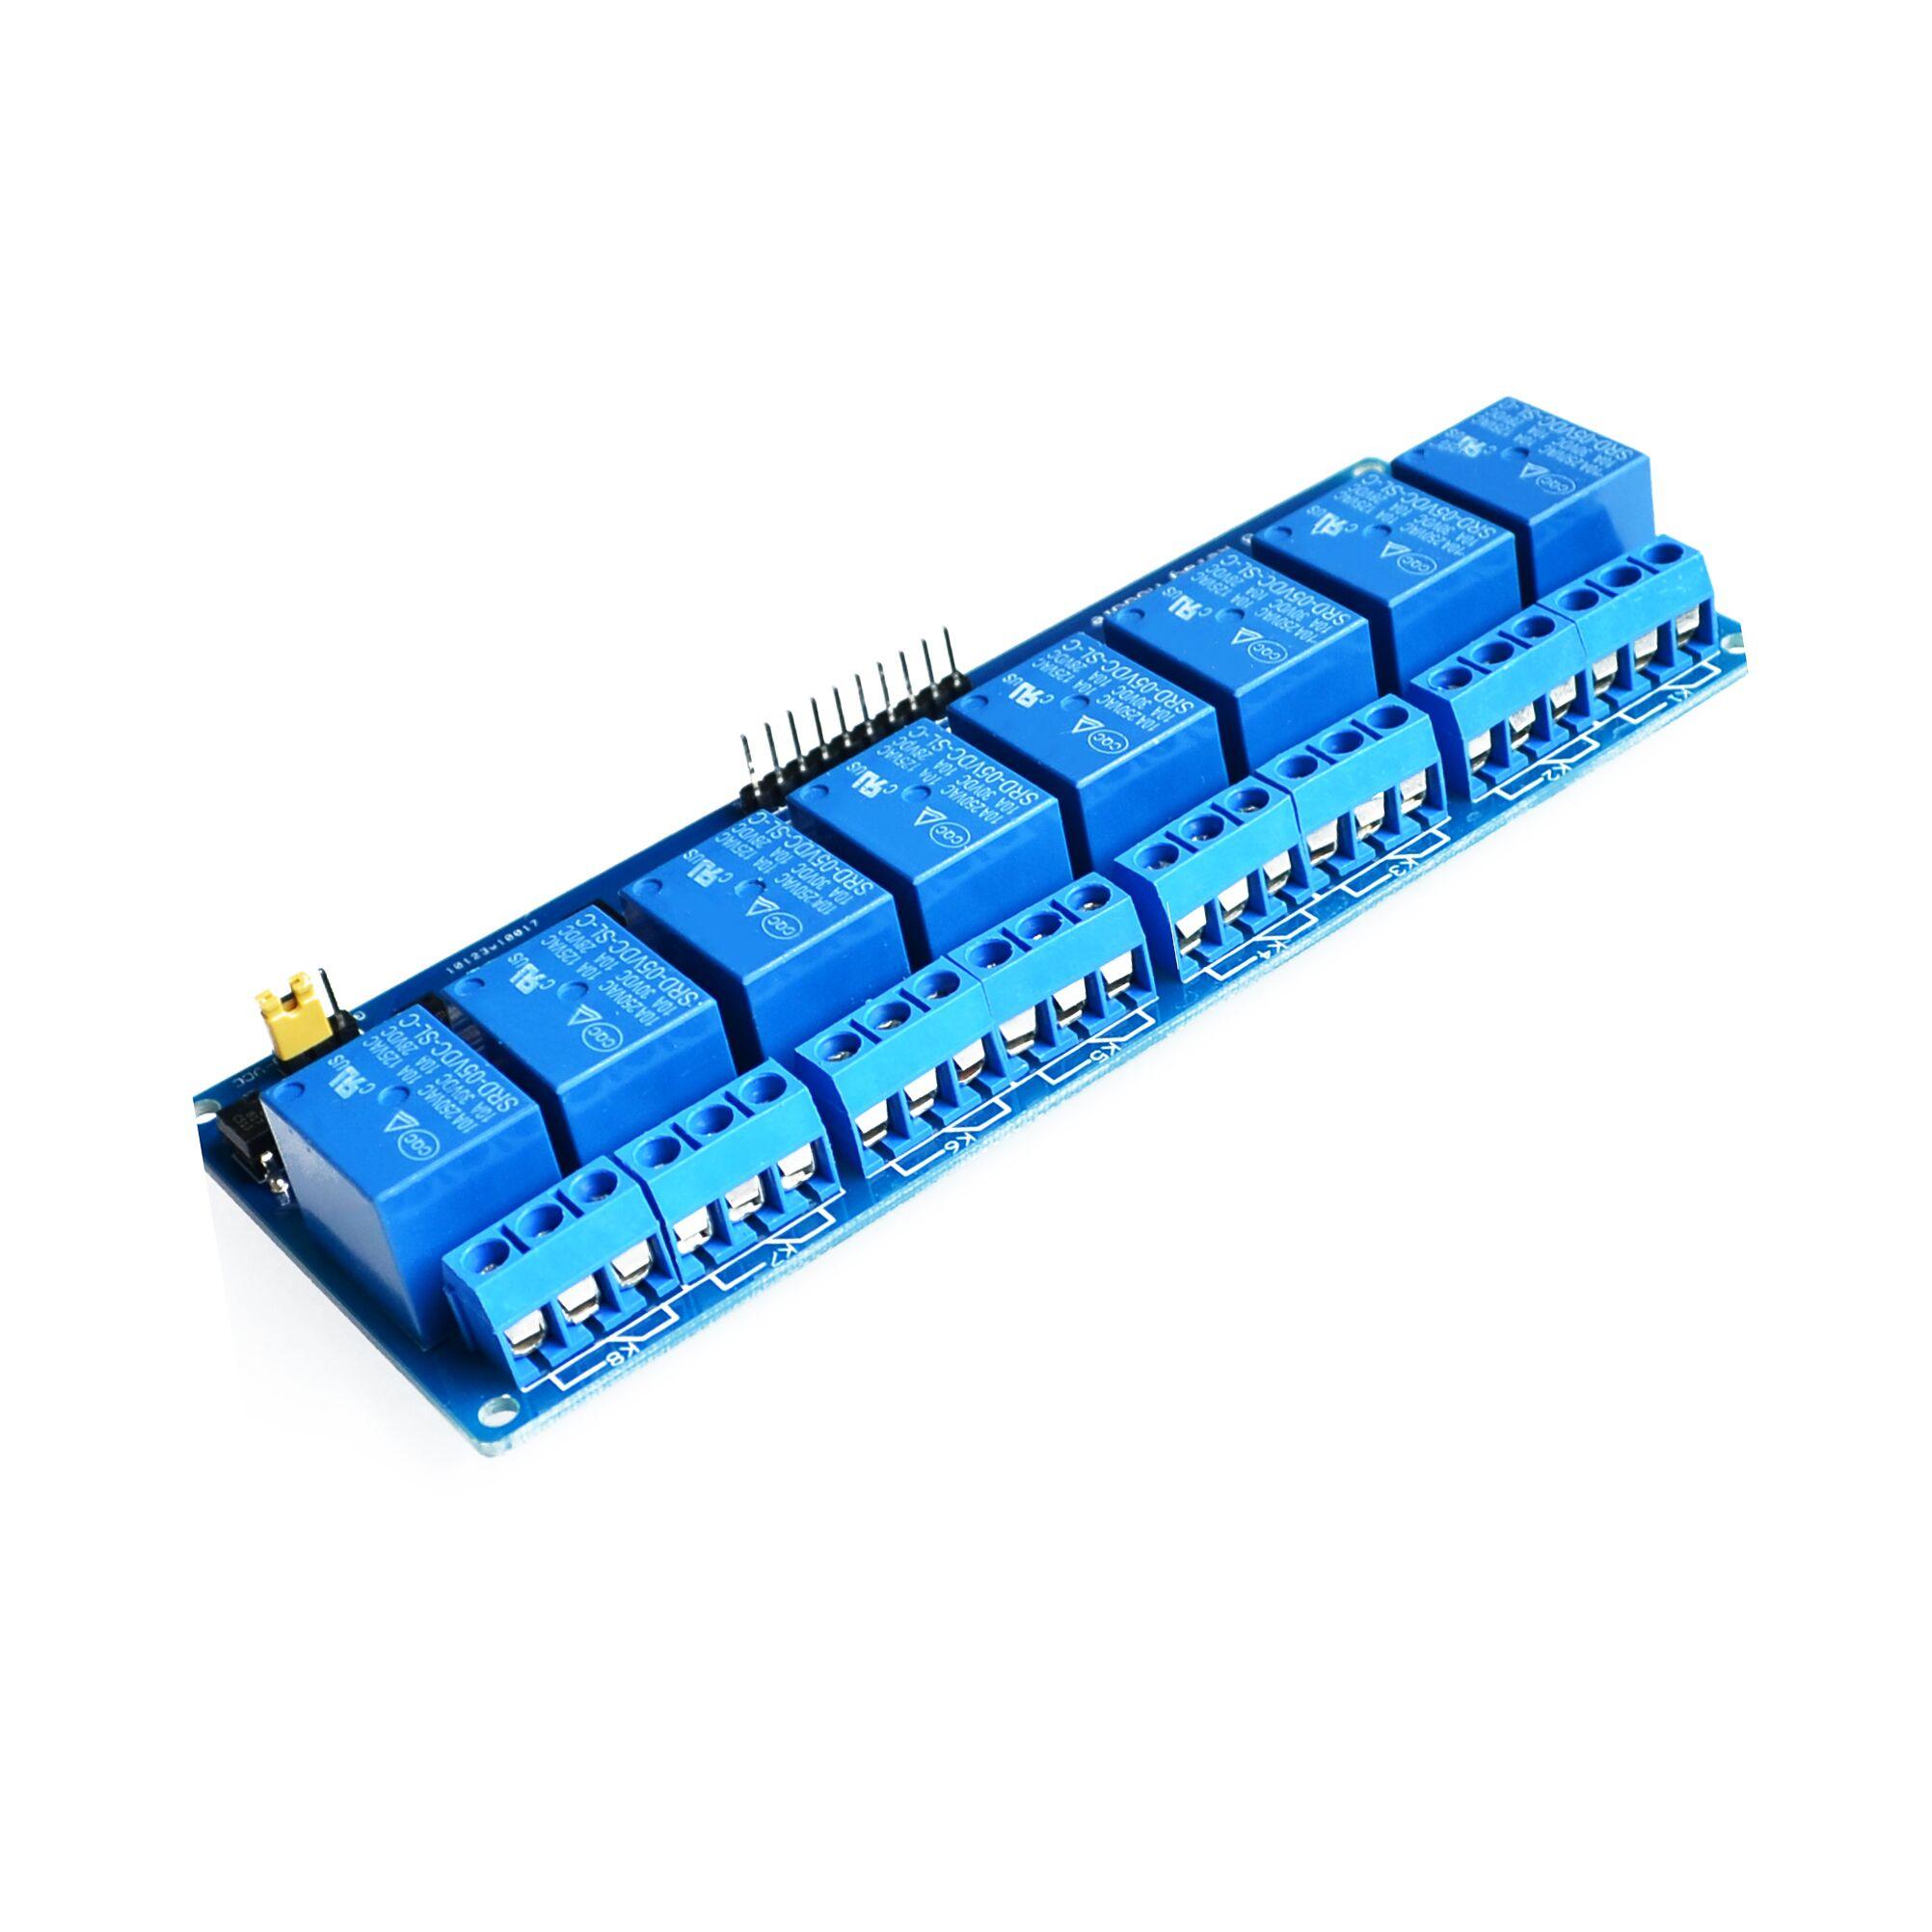 8-Channel Relay DC5V with light coupling protection expansion board have a single way 8 road relay module DC 5v For Arduino